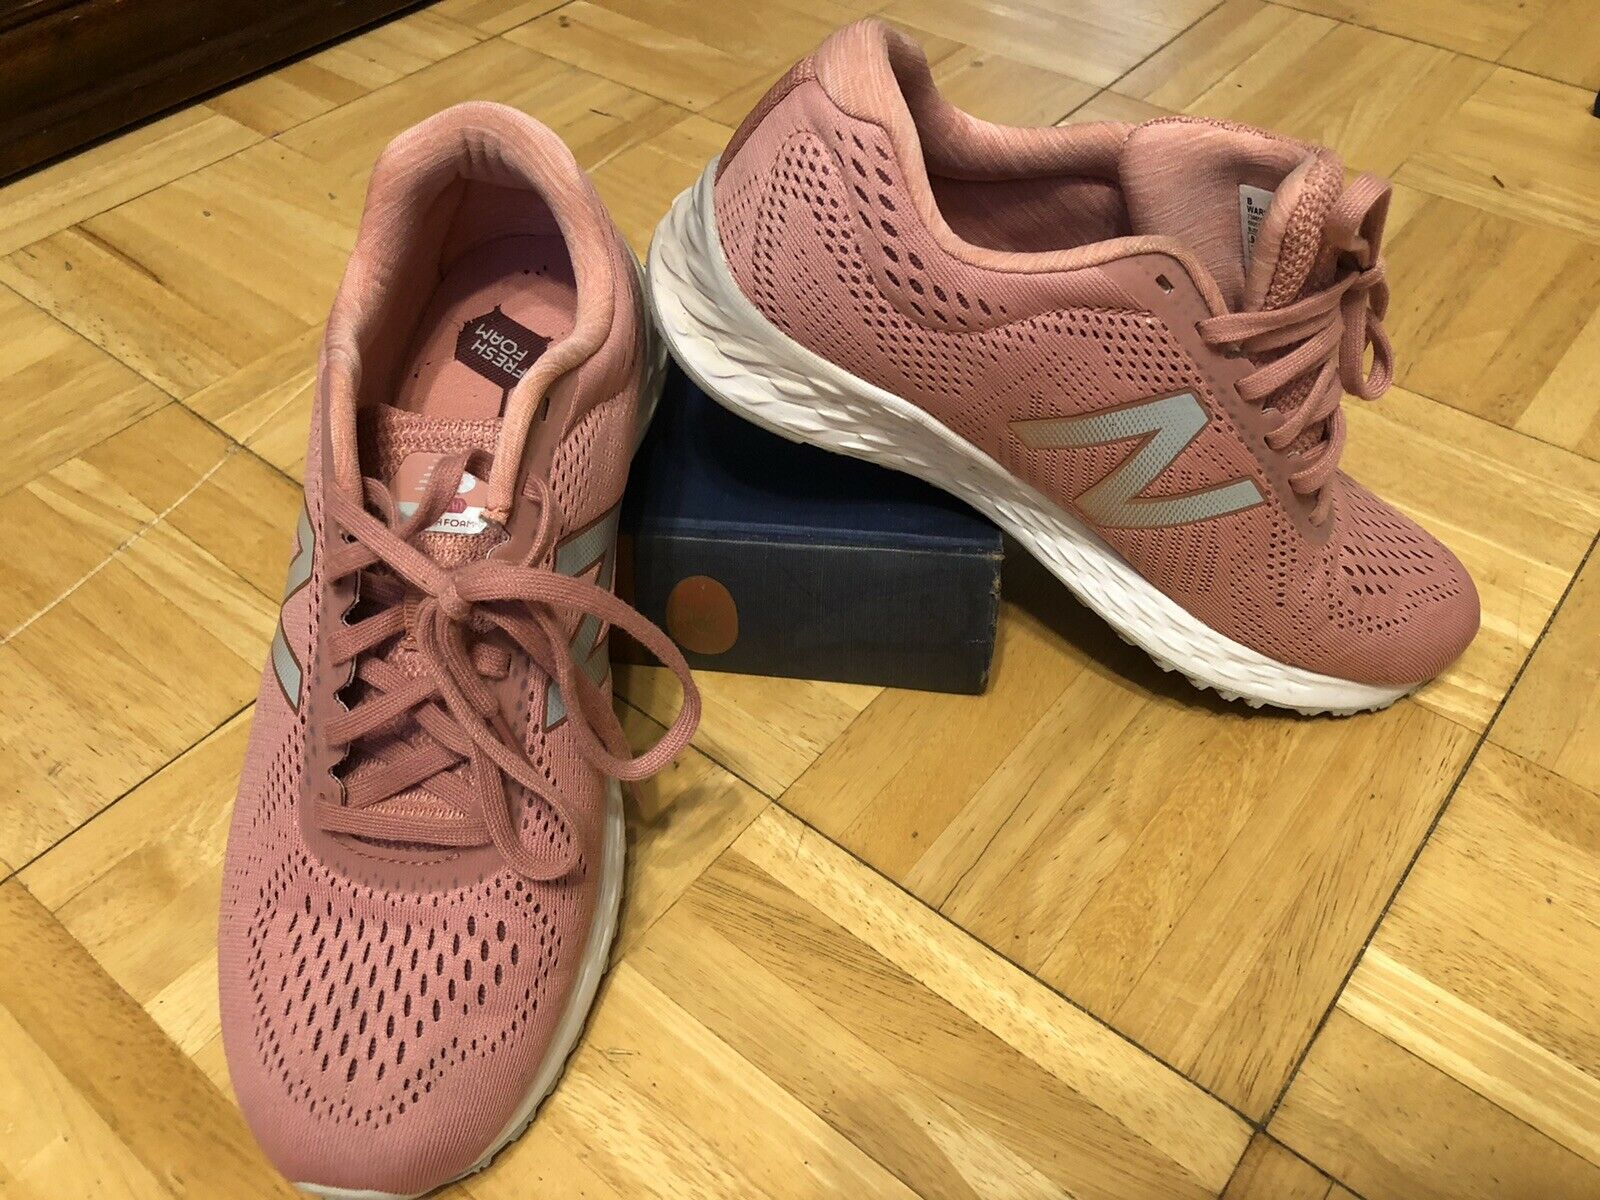 NEW BALANCE PINK WALKING SPORT SHOES VERY COMFY, SALE